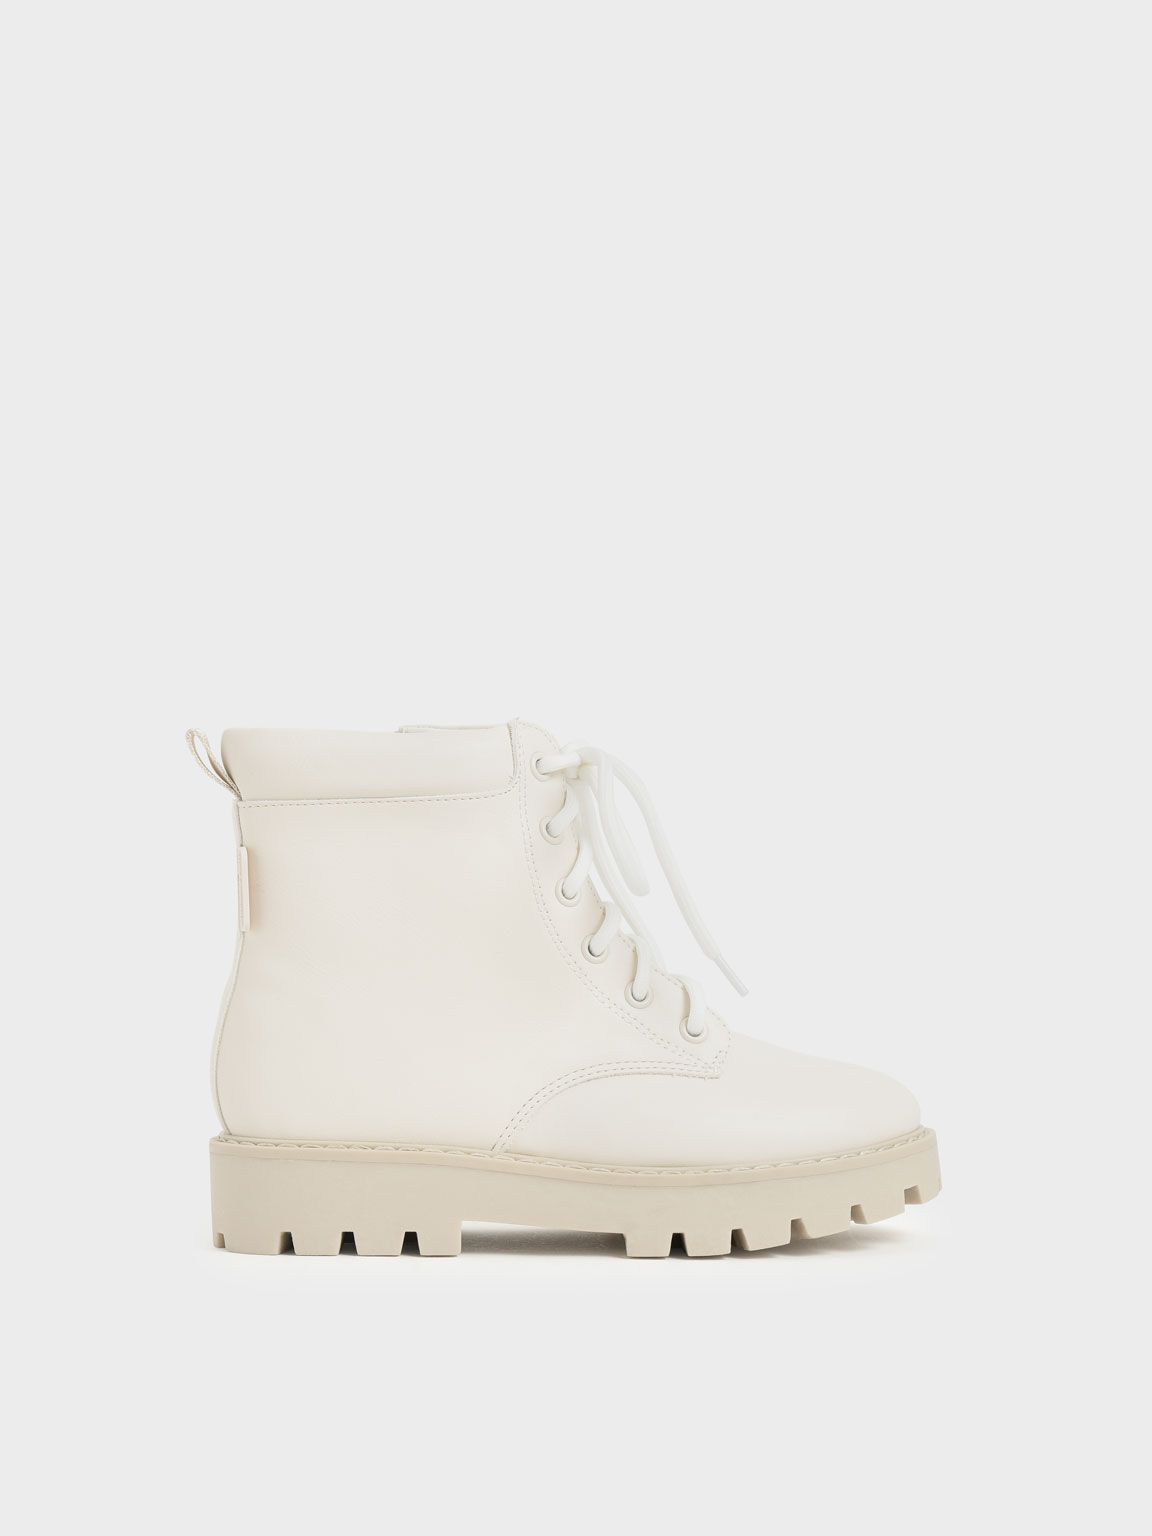 Girls' Lace-Up Ankle Boots, White, hi-res